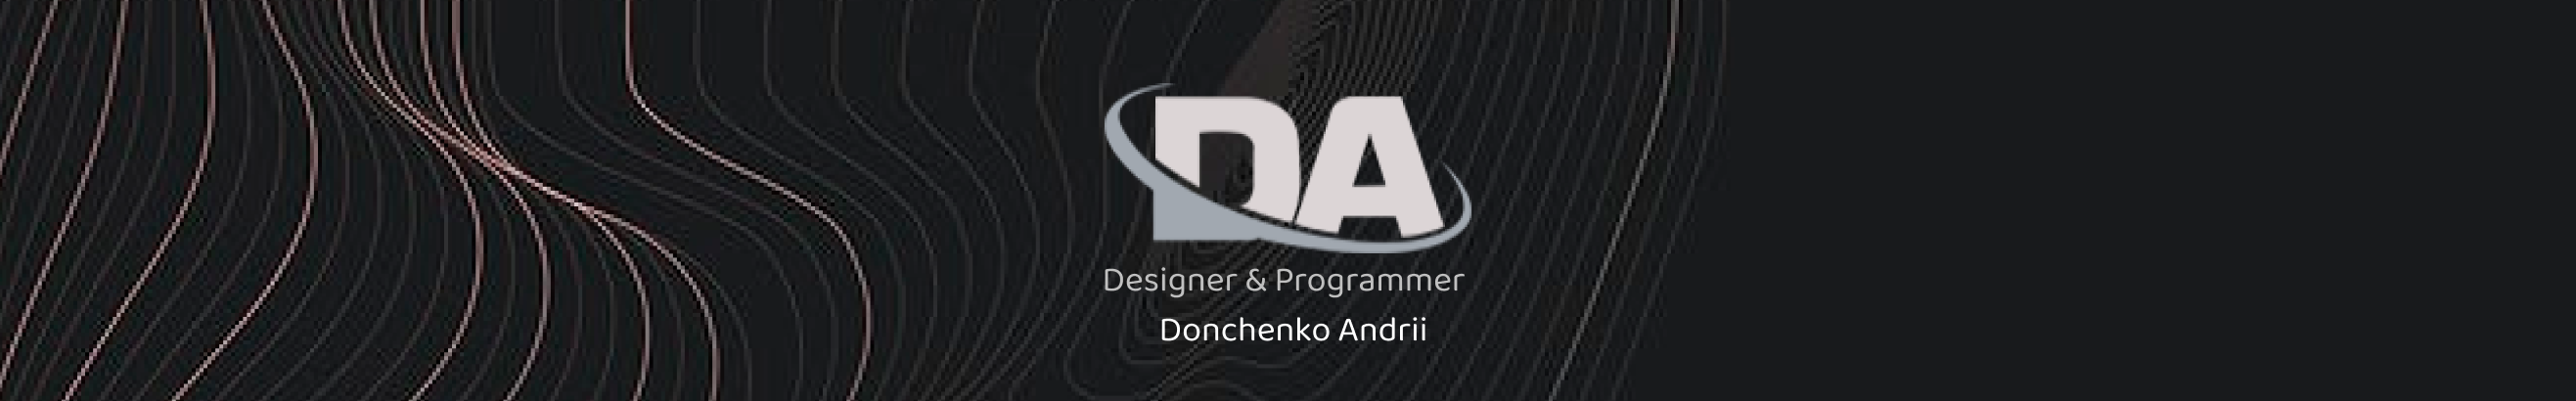 Andrii Donchenko's profile banner